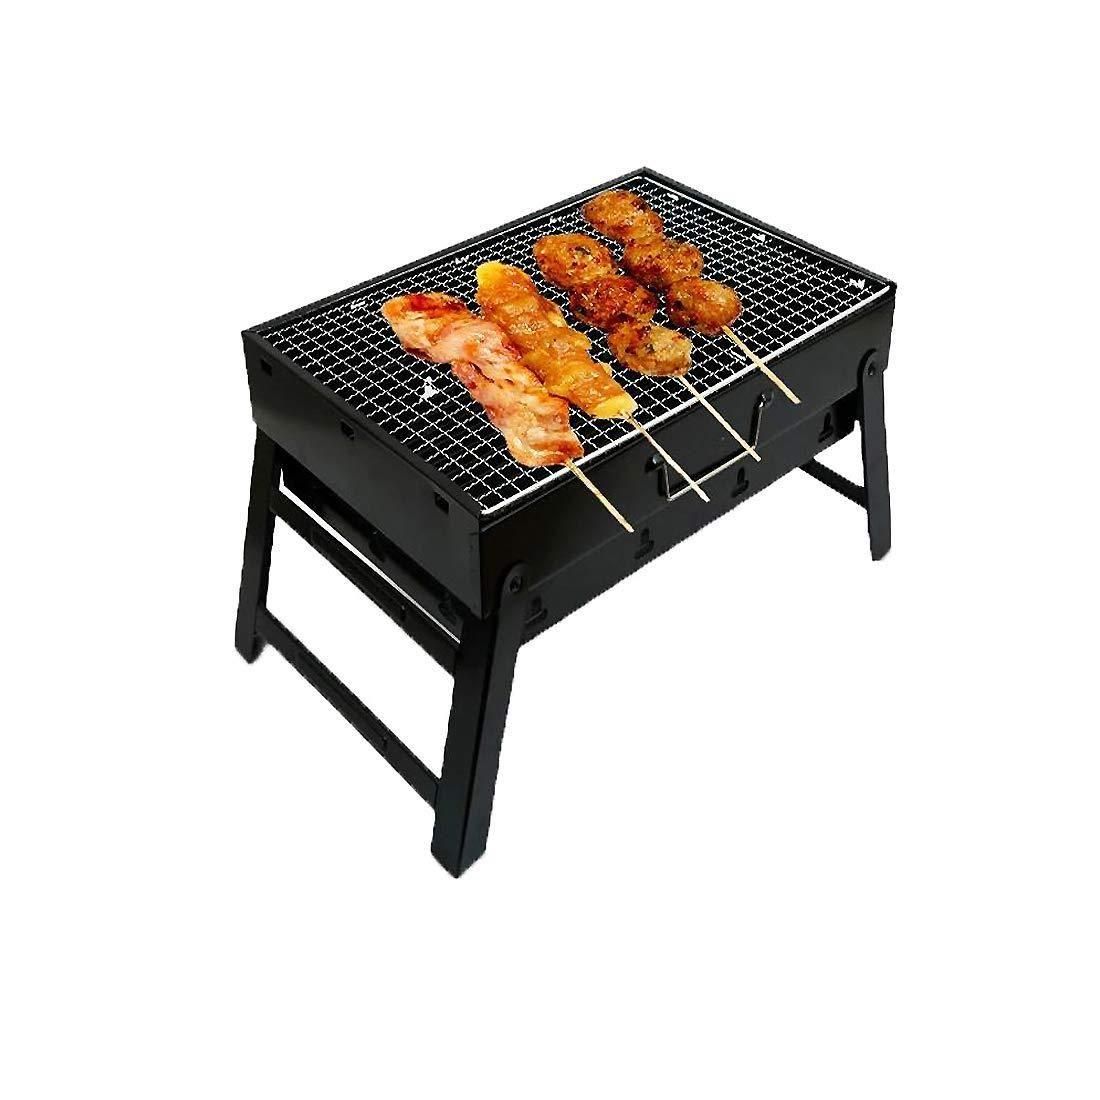 Barbeque Grill - Foldable Barbecue and Tandoor Grill for Camping Hiking Picnic